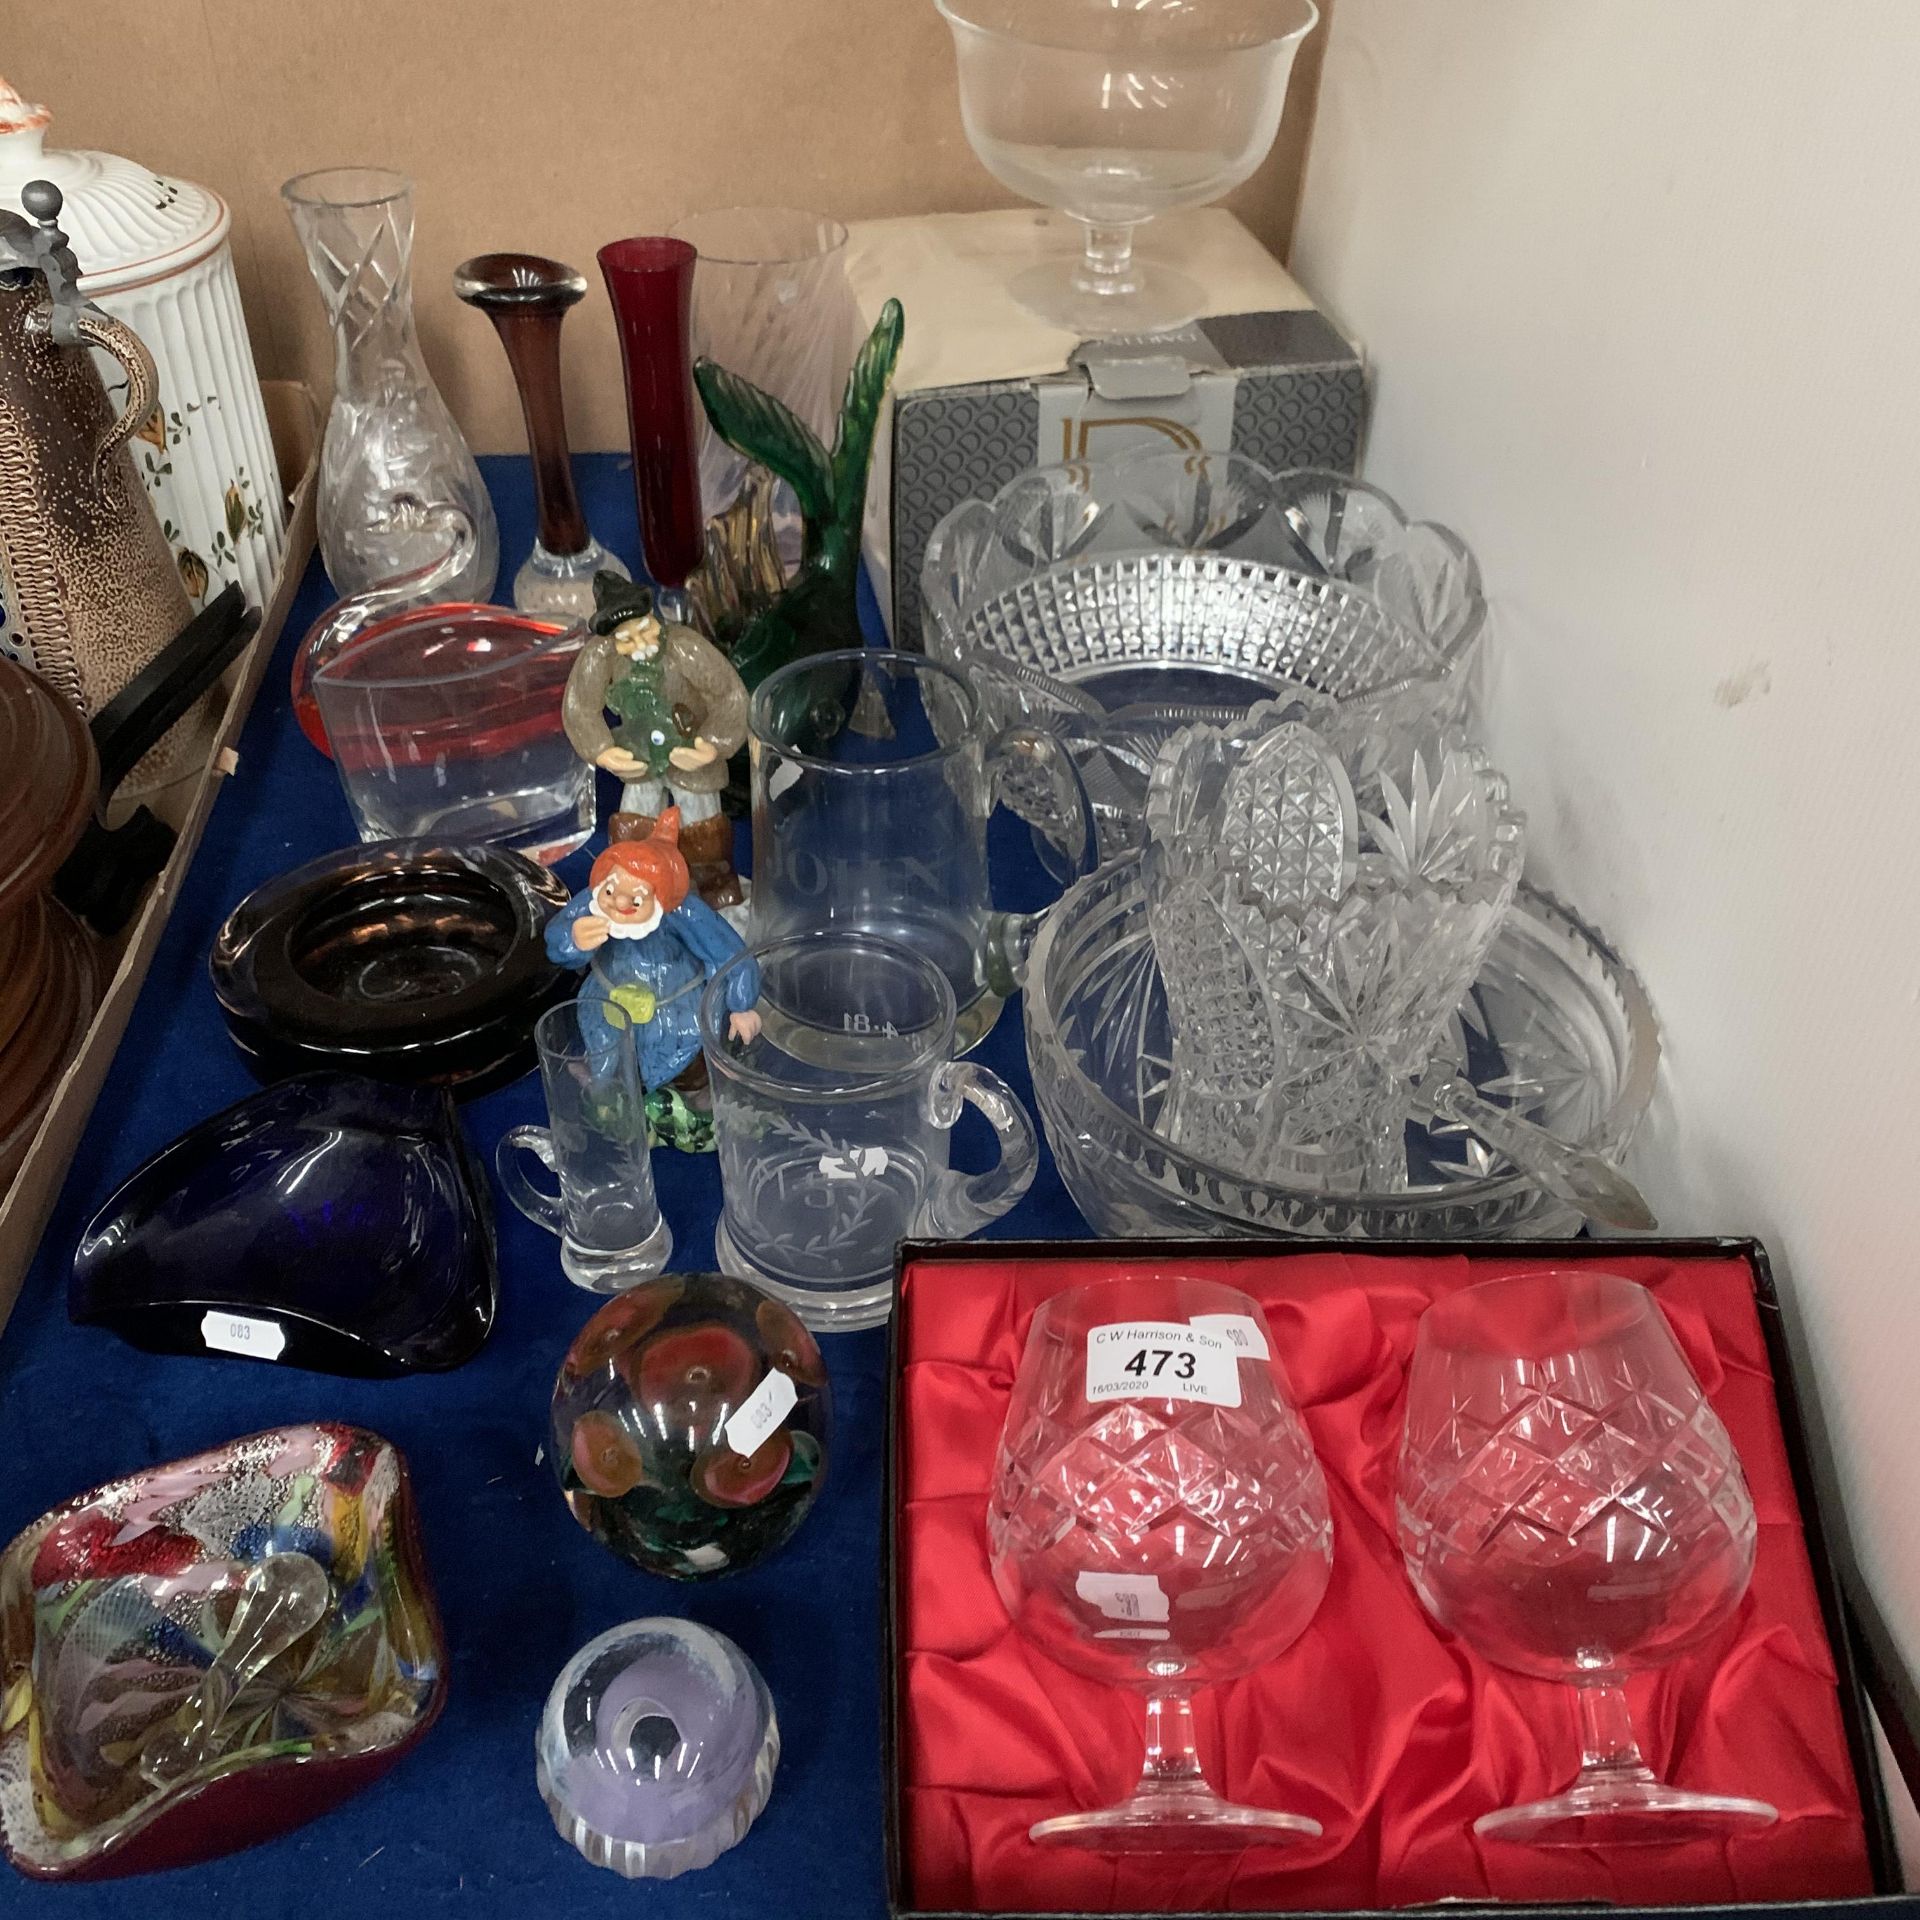 Contents between trays - glassware including bowls, paperweights,